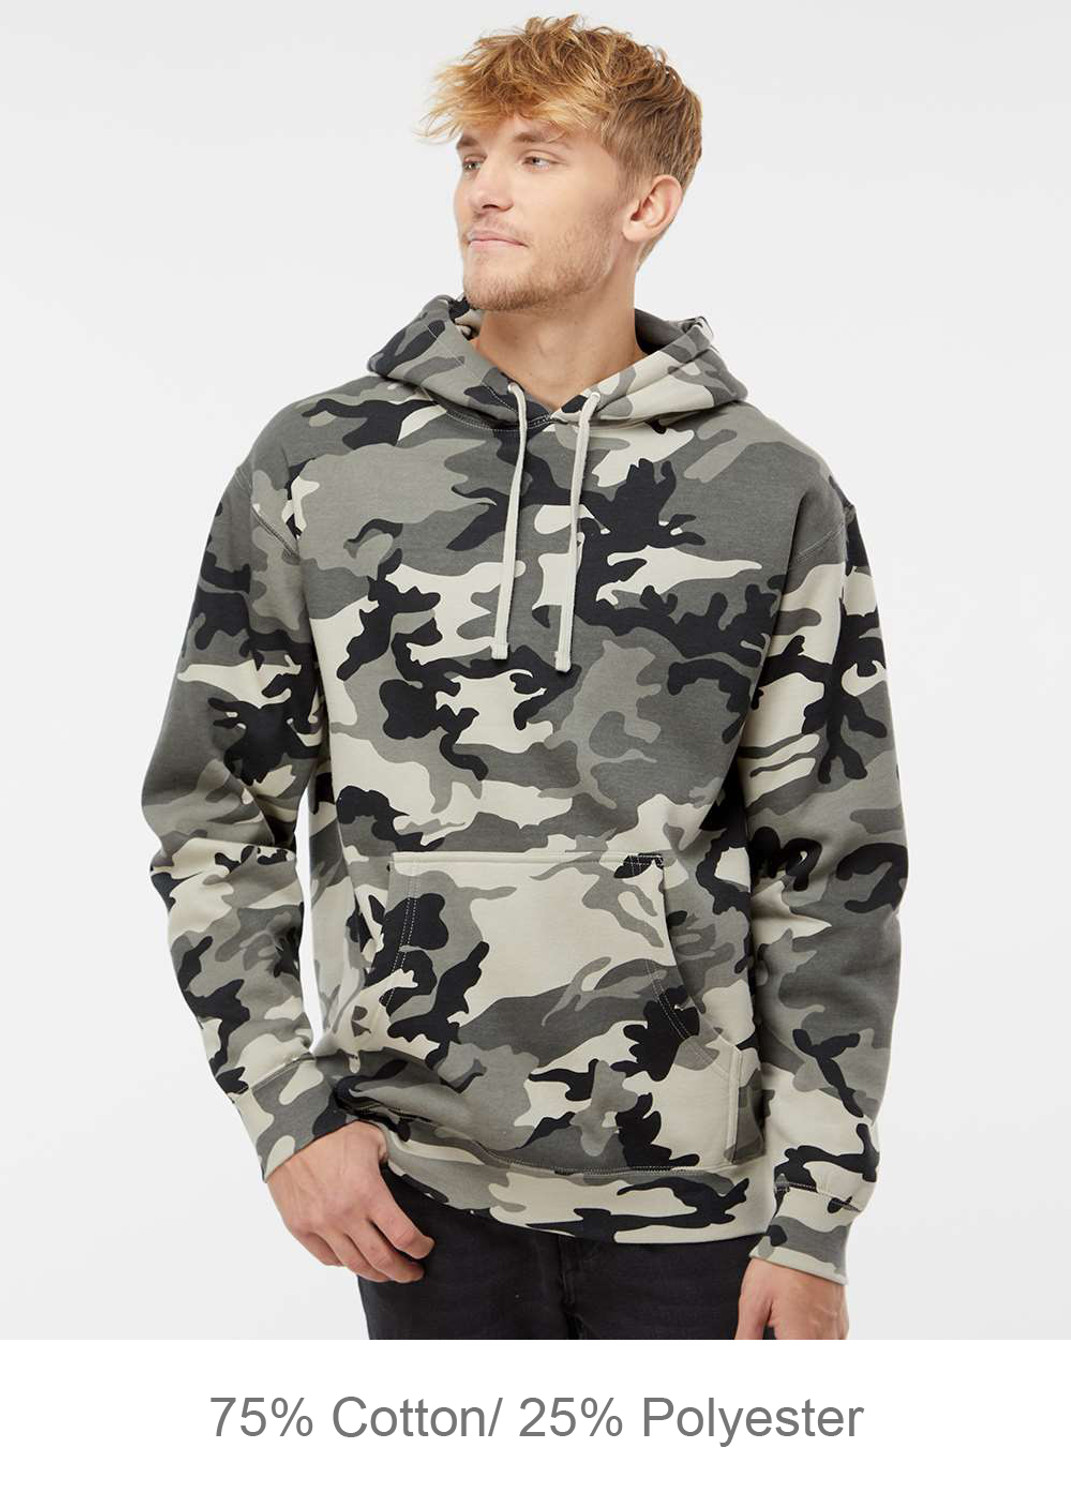 Superdry Hoodies, T-Shirts for Men, Superdry Clothing Canada